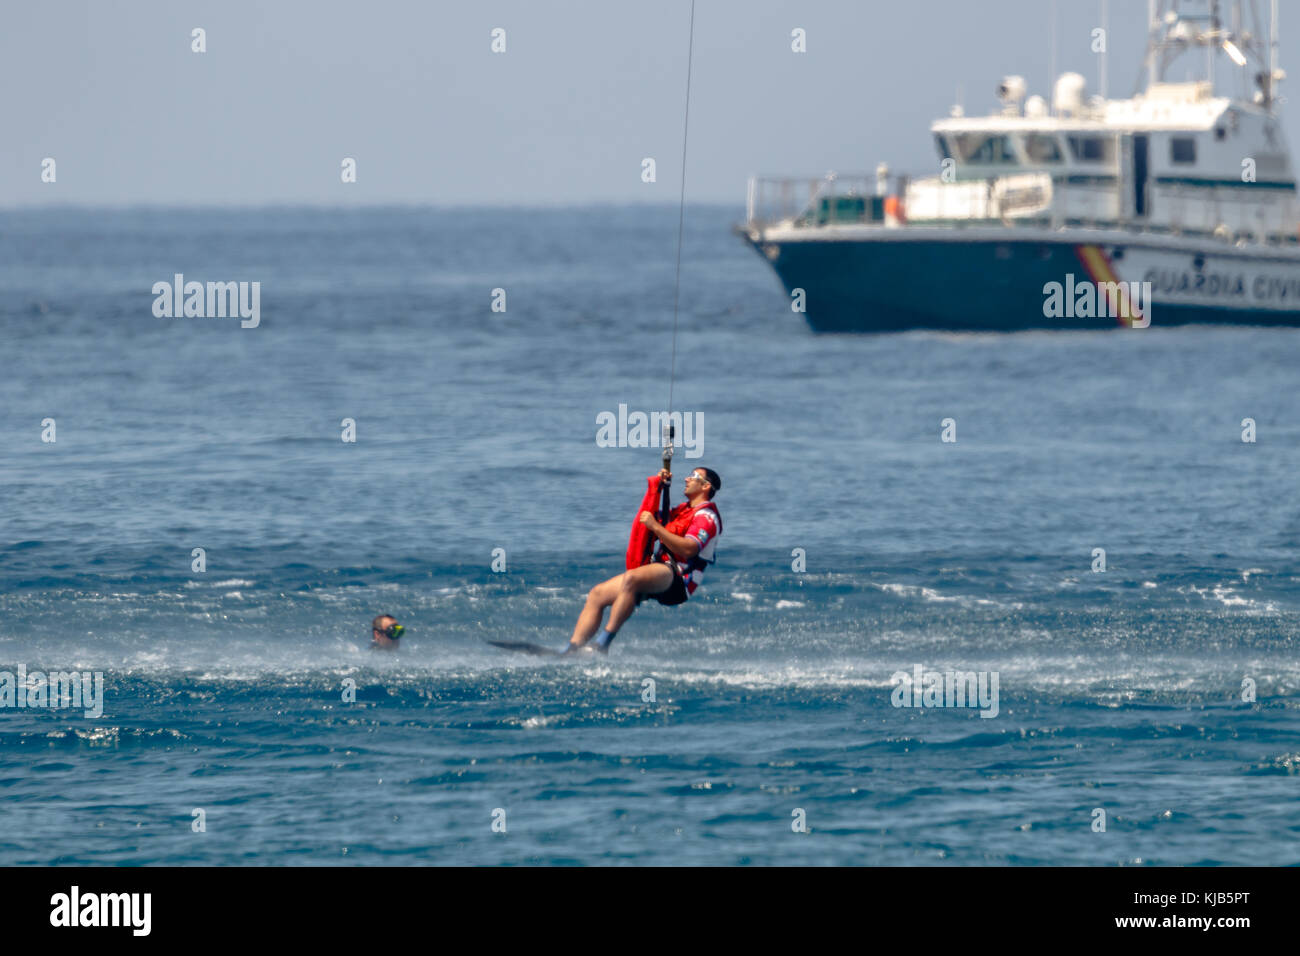 MOTRIL, GRANADA, SPAIN-JUN 11: Military rescue diver taking part in an exhibition on the 12th international airshow of Motril on Jun 11, 2017, in Motr Stock Photo